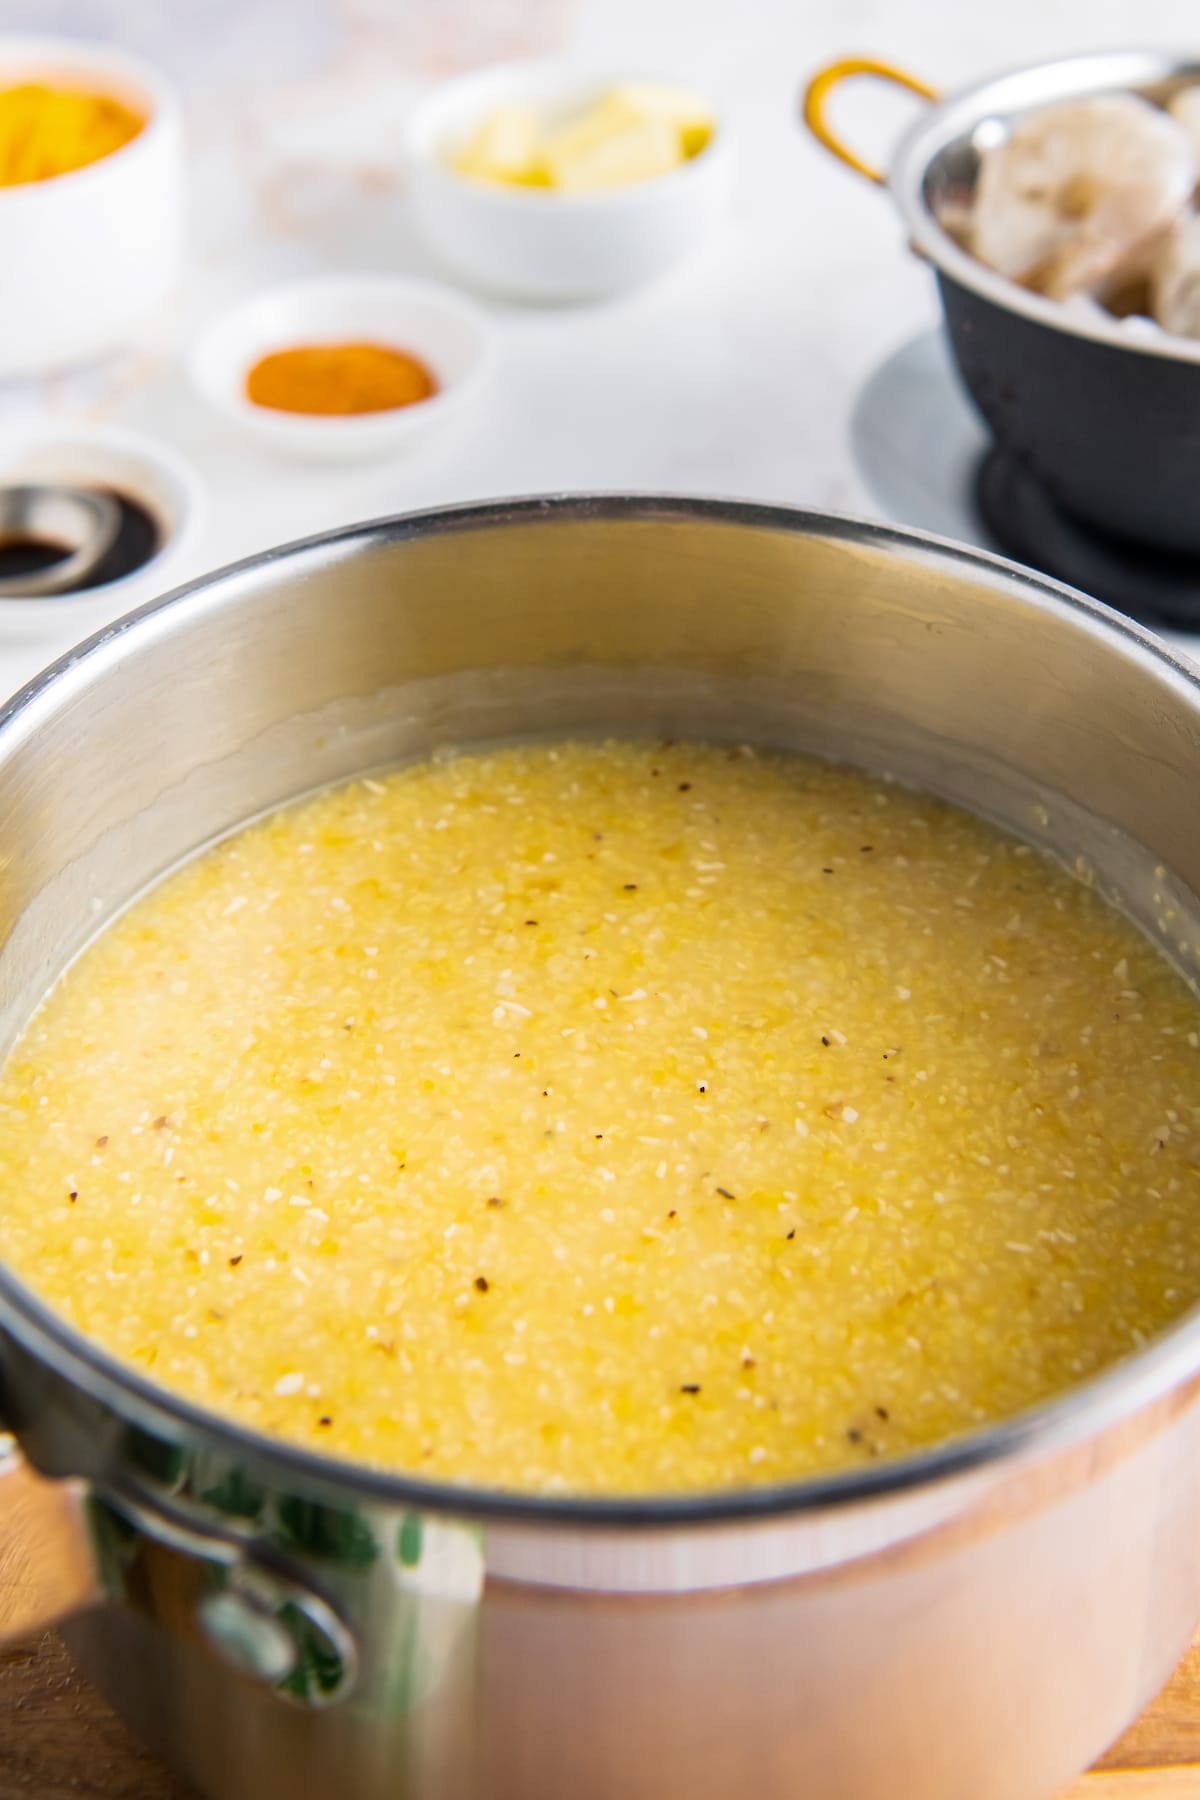 grits cooking in a sauce pot